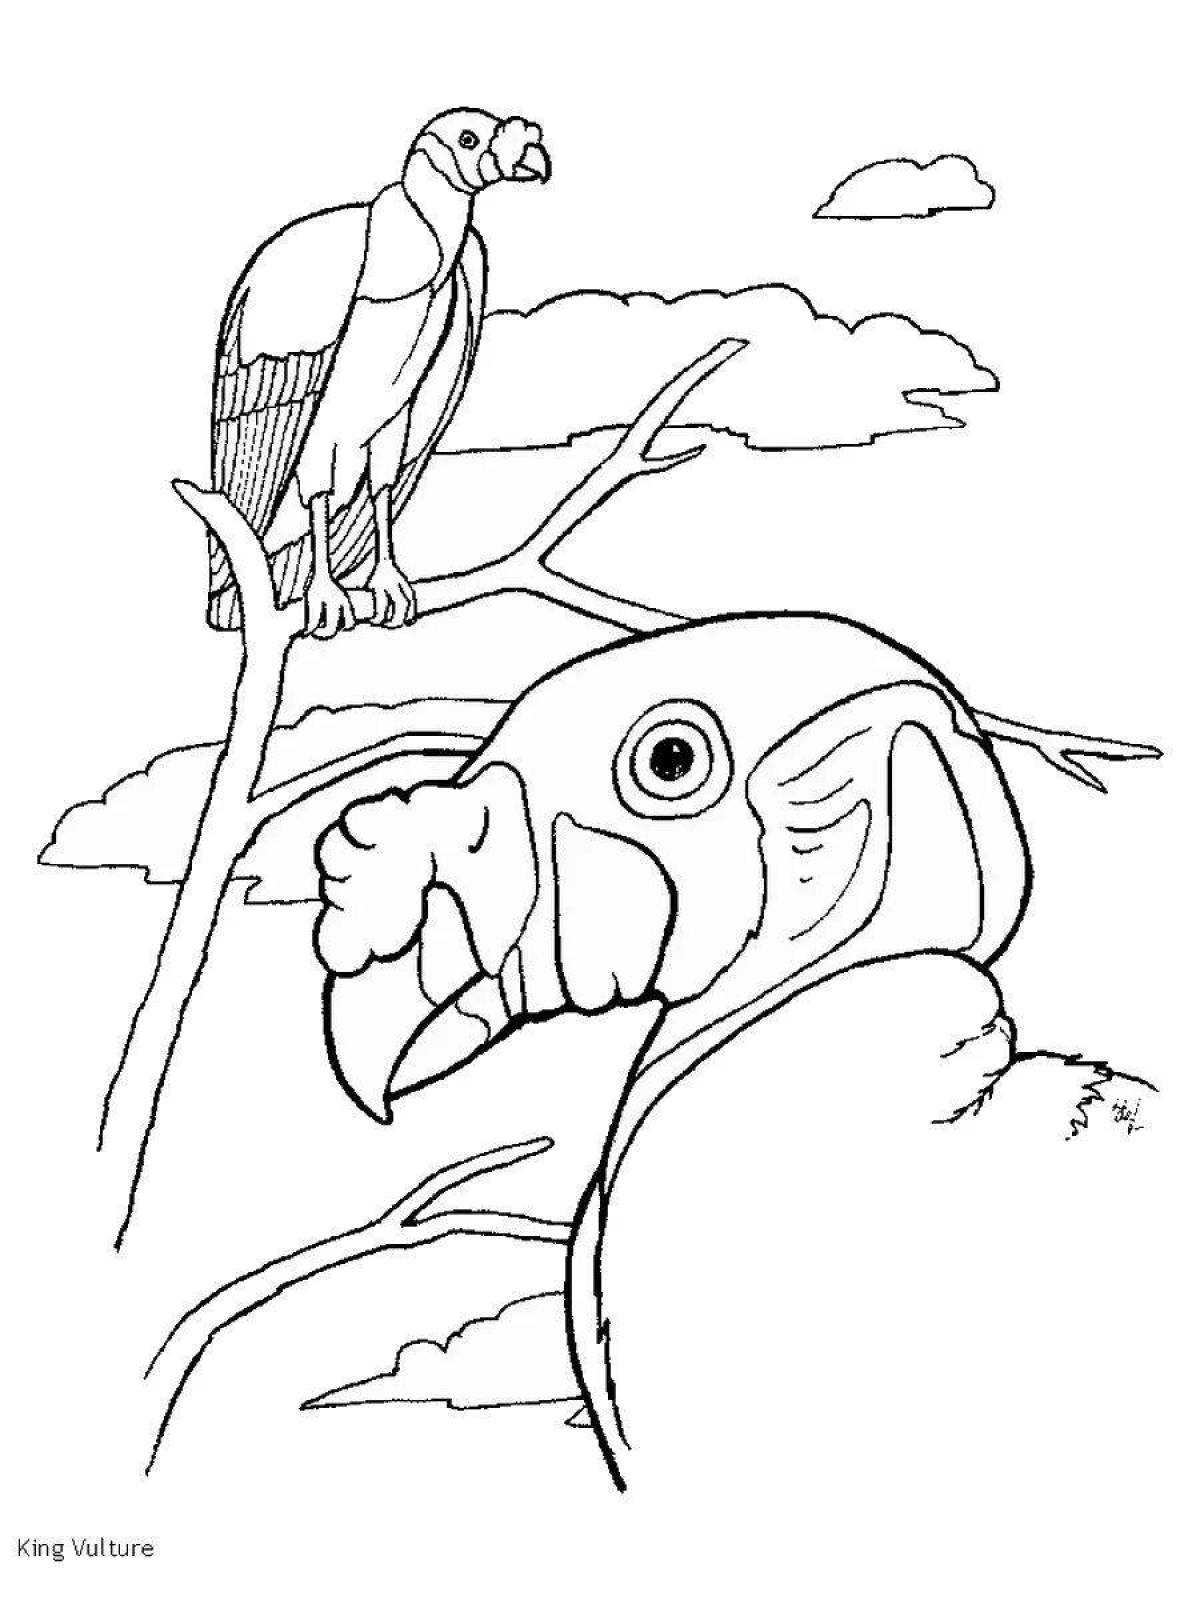 Coloring page nice vulture